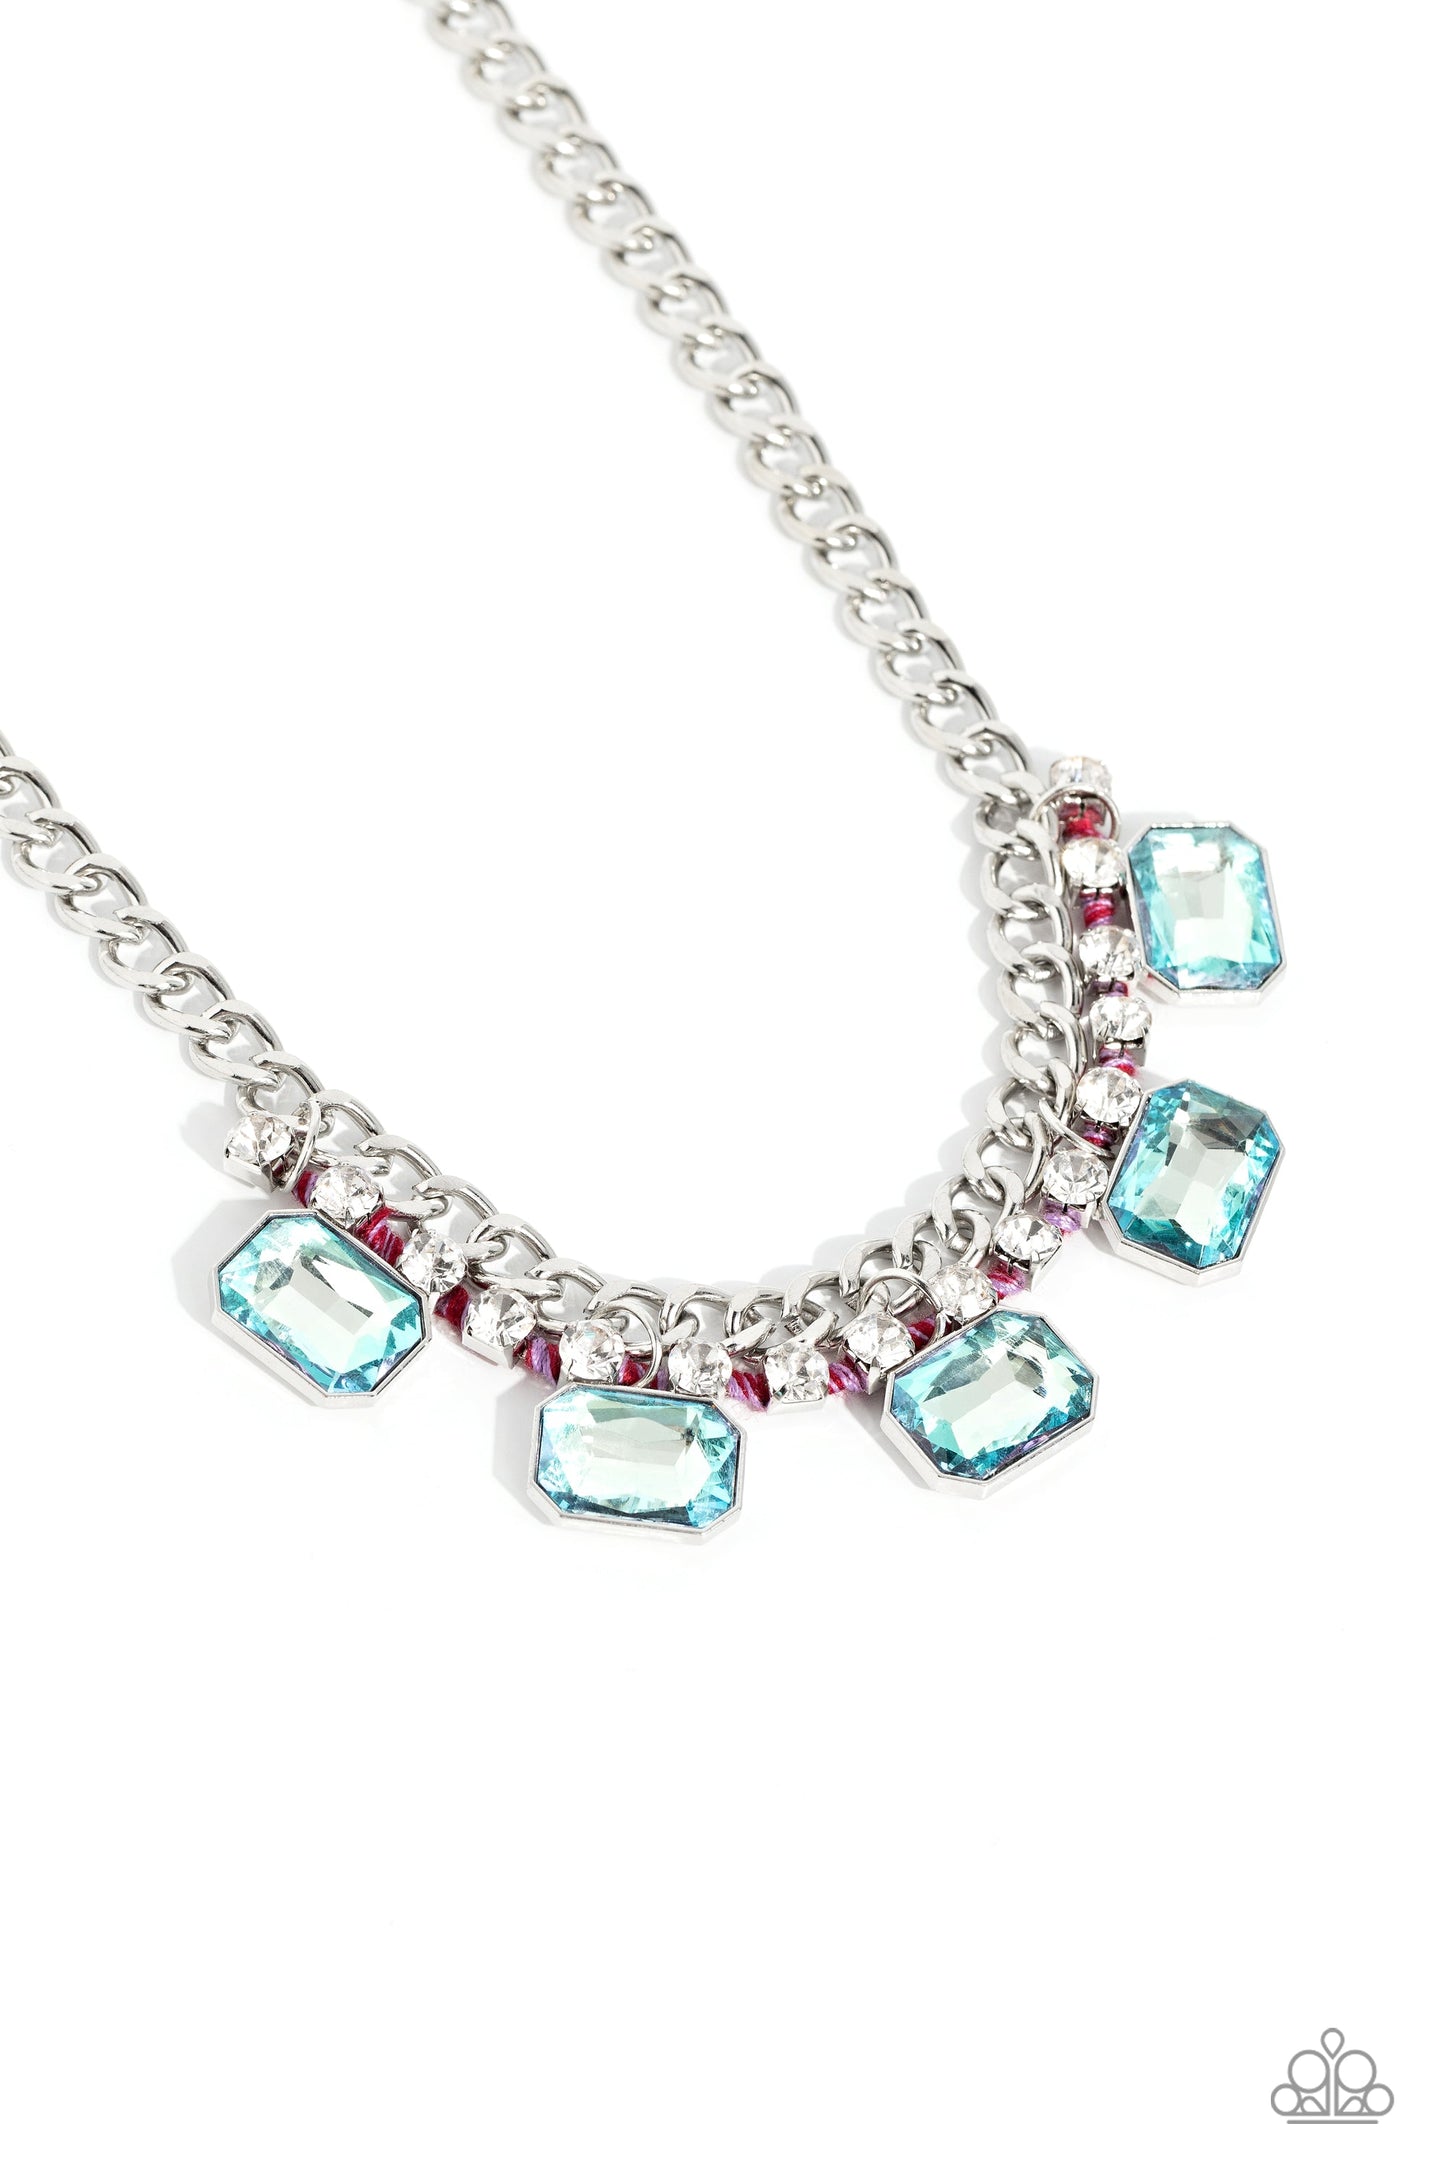 WEAVING Wonder - Multi Color Gem Necklace - Paparazzi Accessories - Brushed in a high-sheen finish, a strand of flat silver curb chain dramatically drapes across the chest for a bold industrial look. A row of faceted light blue emerald-cut gems cascade from the bottom of a strand of glittery white rhinestones set in silver square fittings and ornately woven in Viva Magenta and purple cording for a modern look.